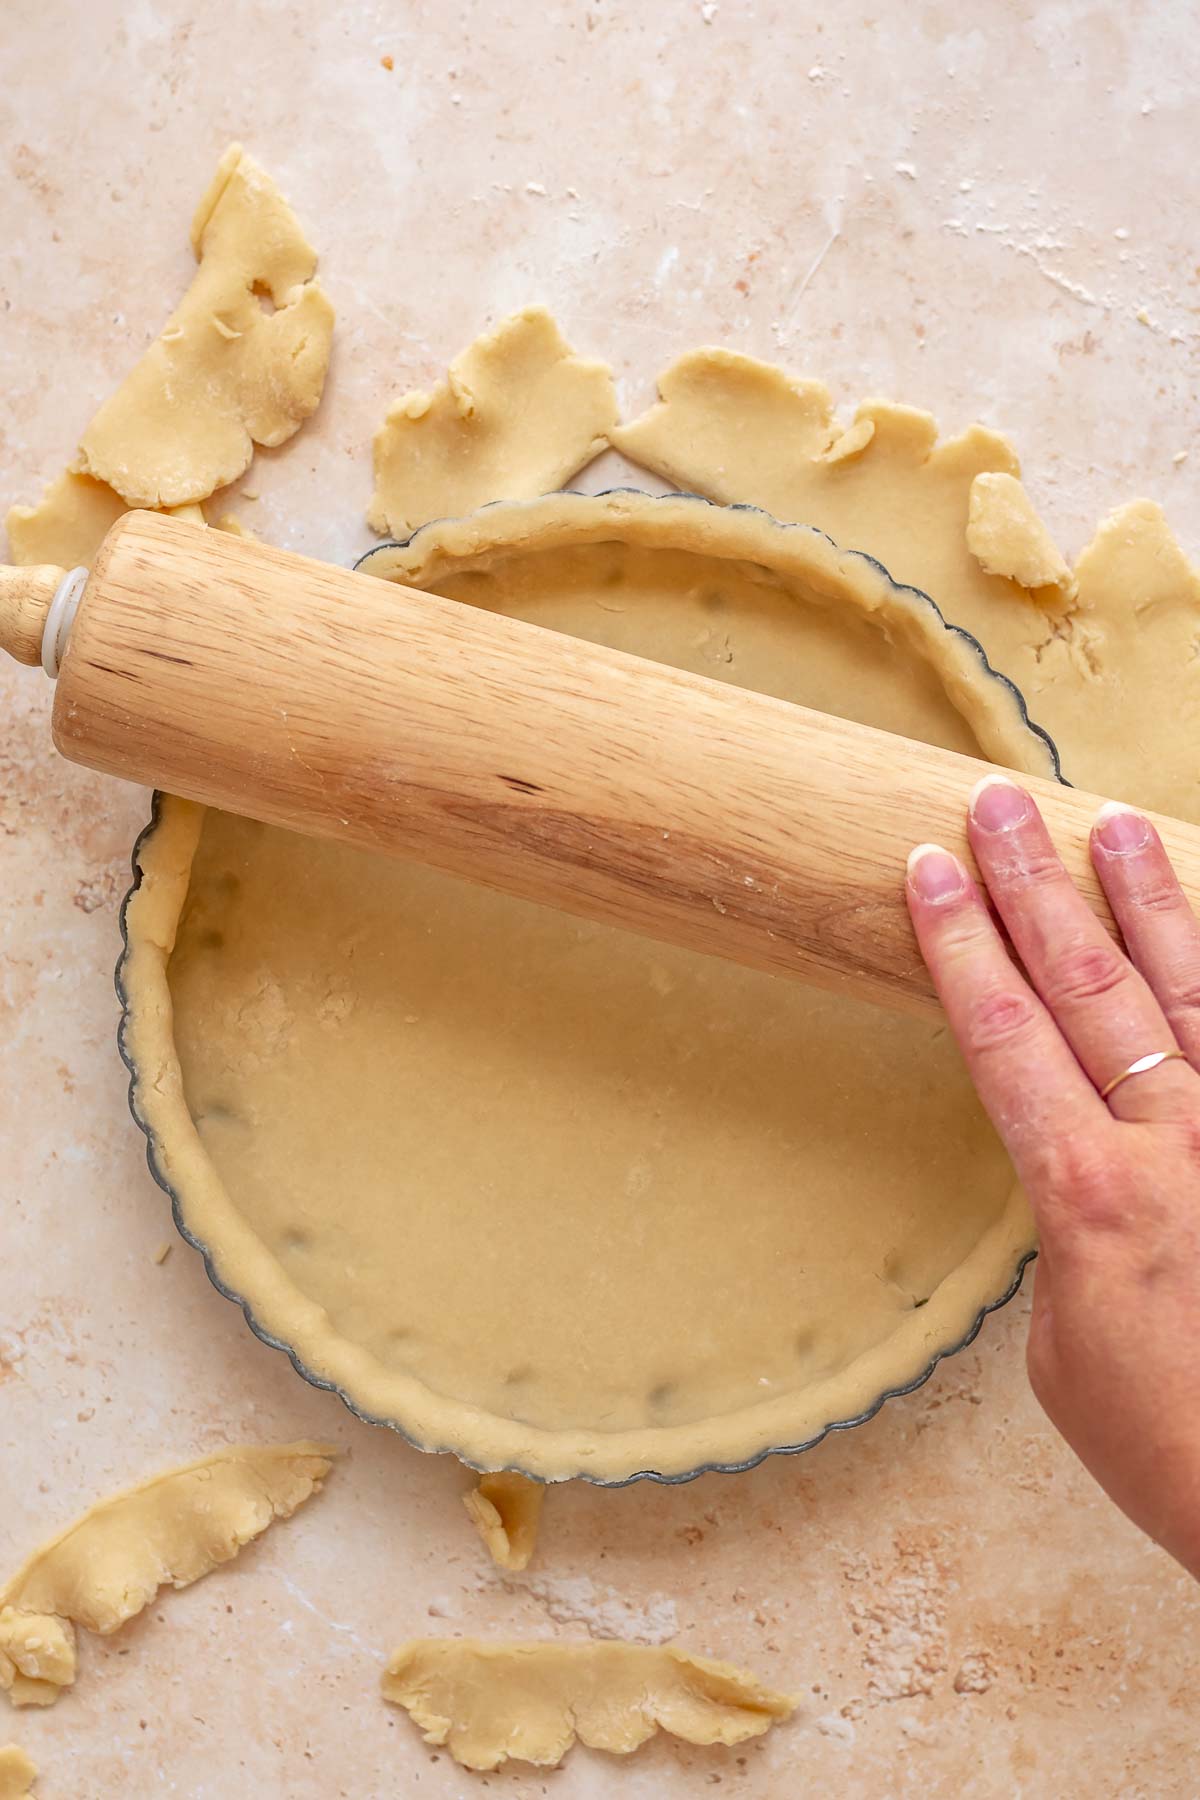 A rolling pin goes over the top of a tart pan to remove excess pastry.